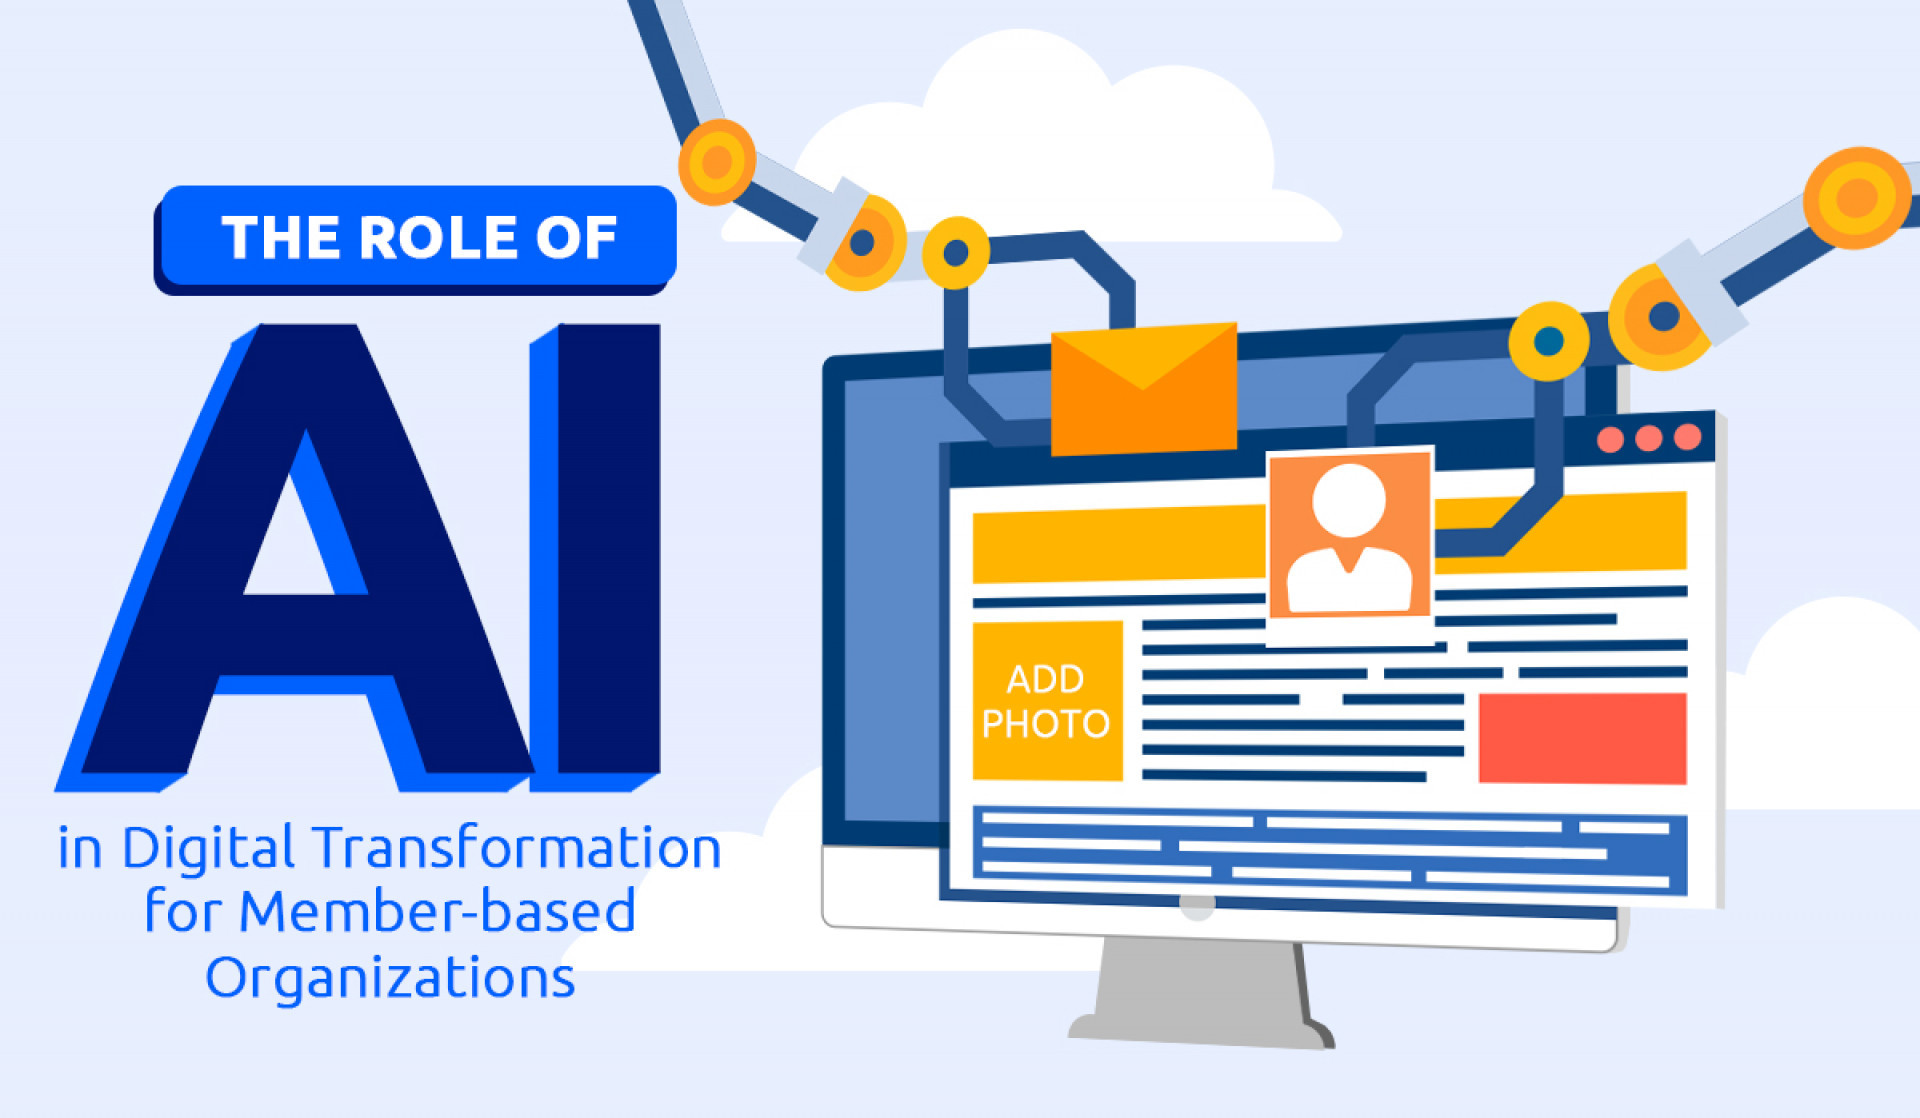 The Role of Artificial Intelligence in Digital Transformation for Member-Based Organizations